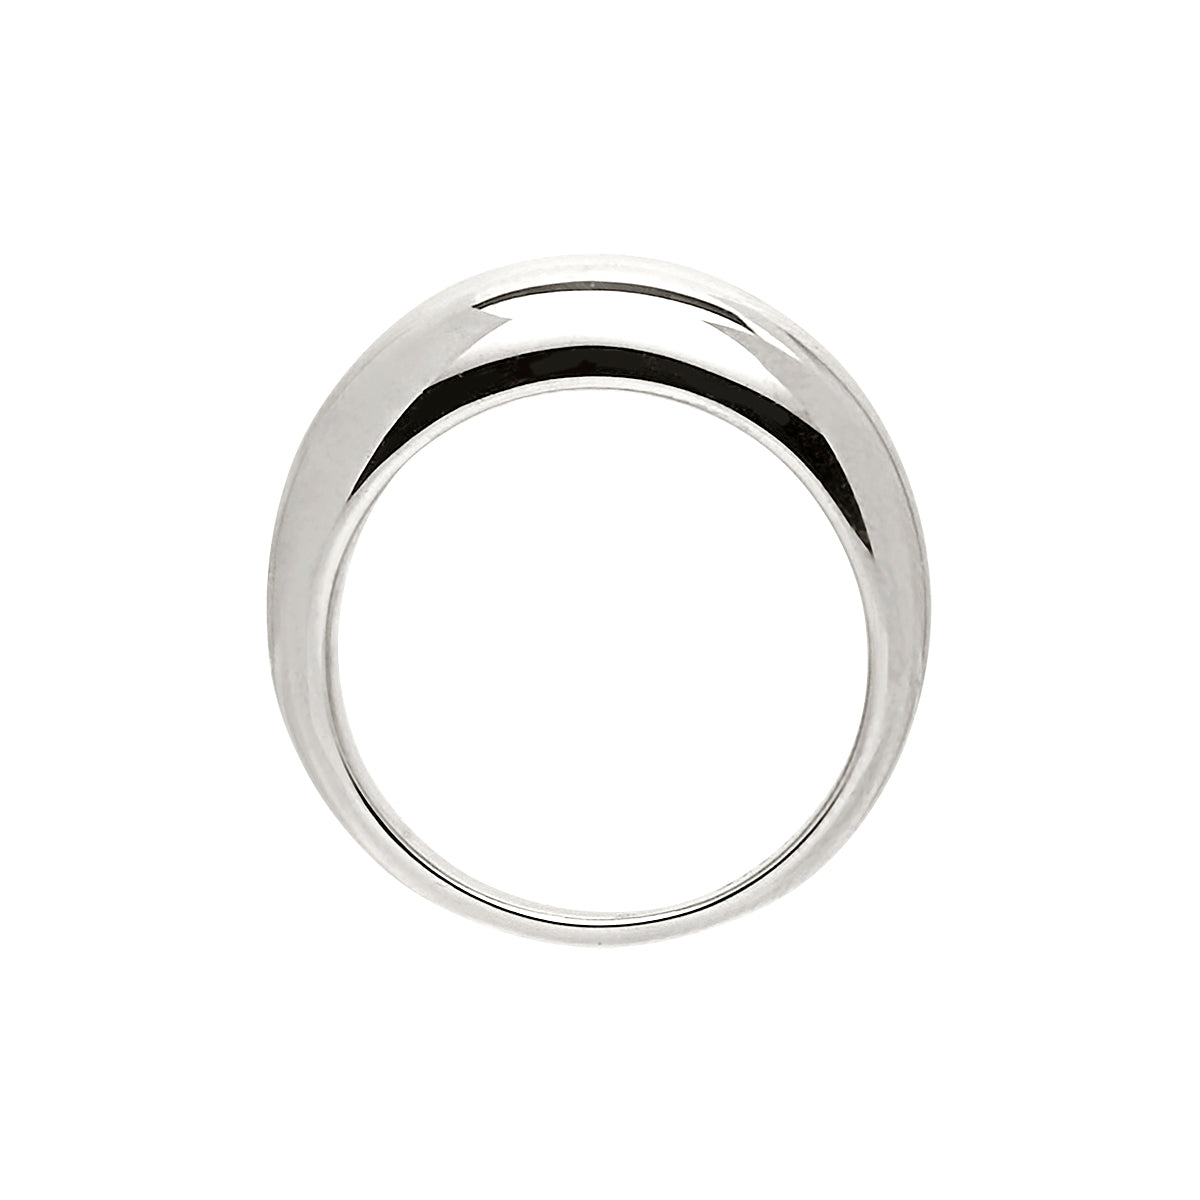 Najo Sublime Silver Ring R6507 Size P 1/2